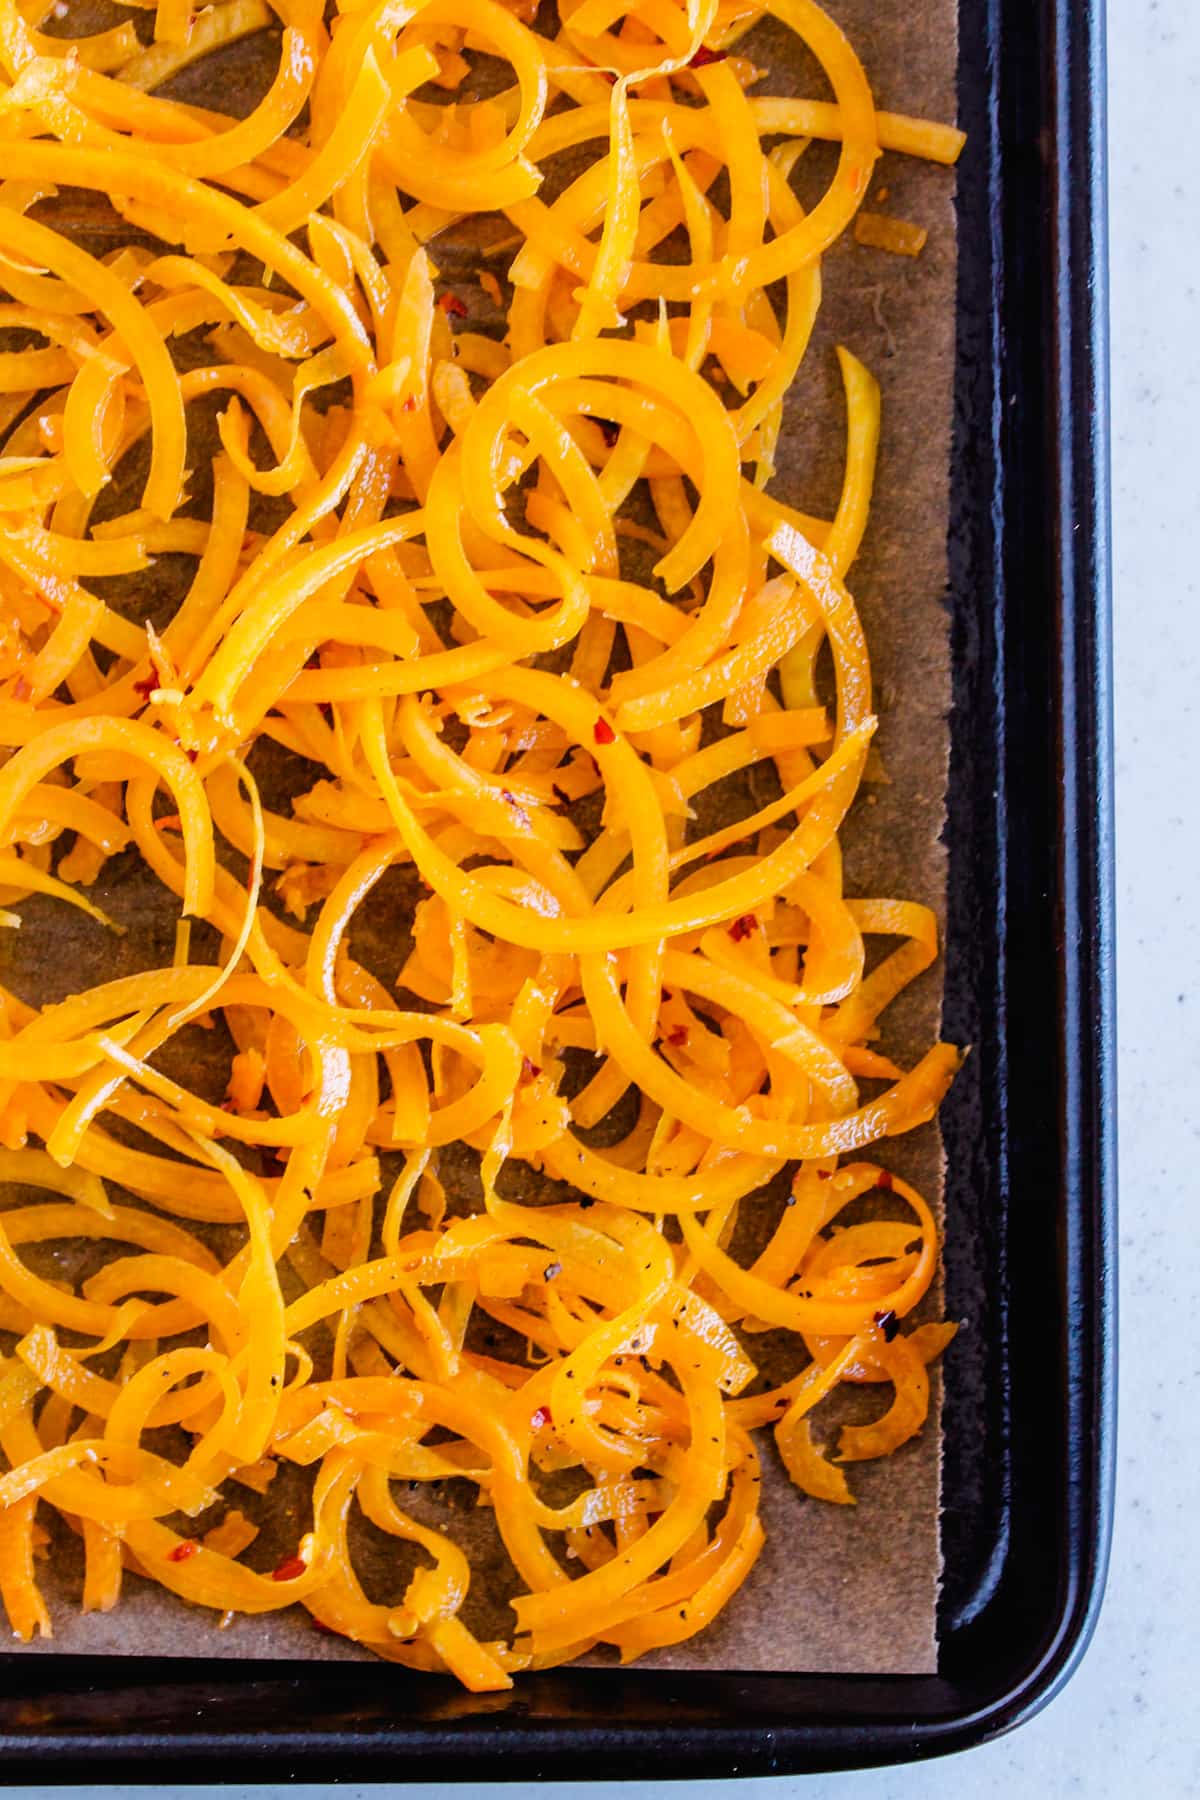 Veggie noodles on a baking tray.